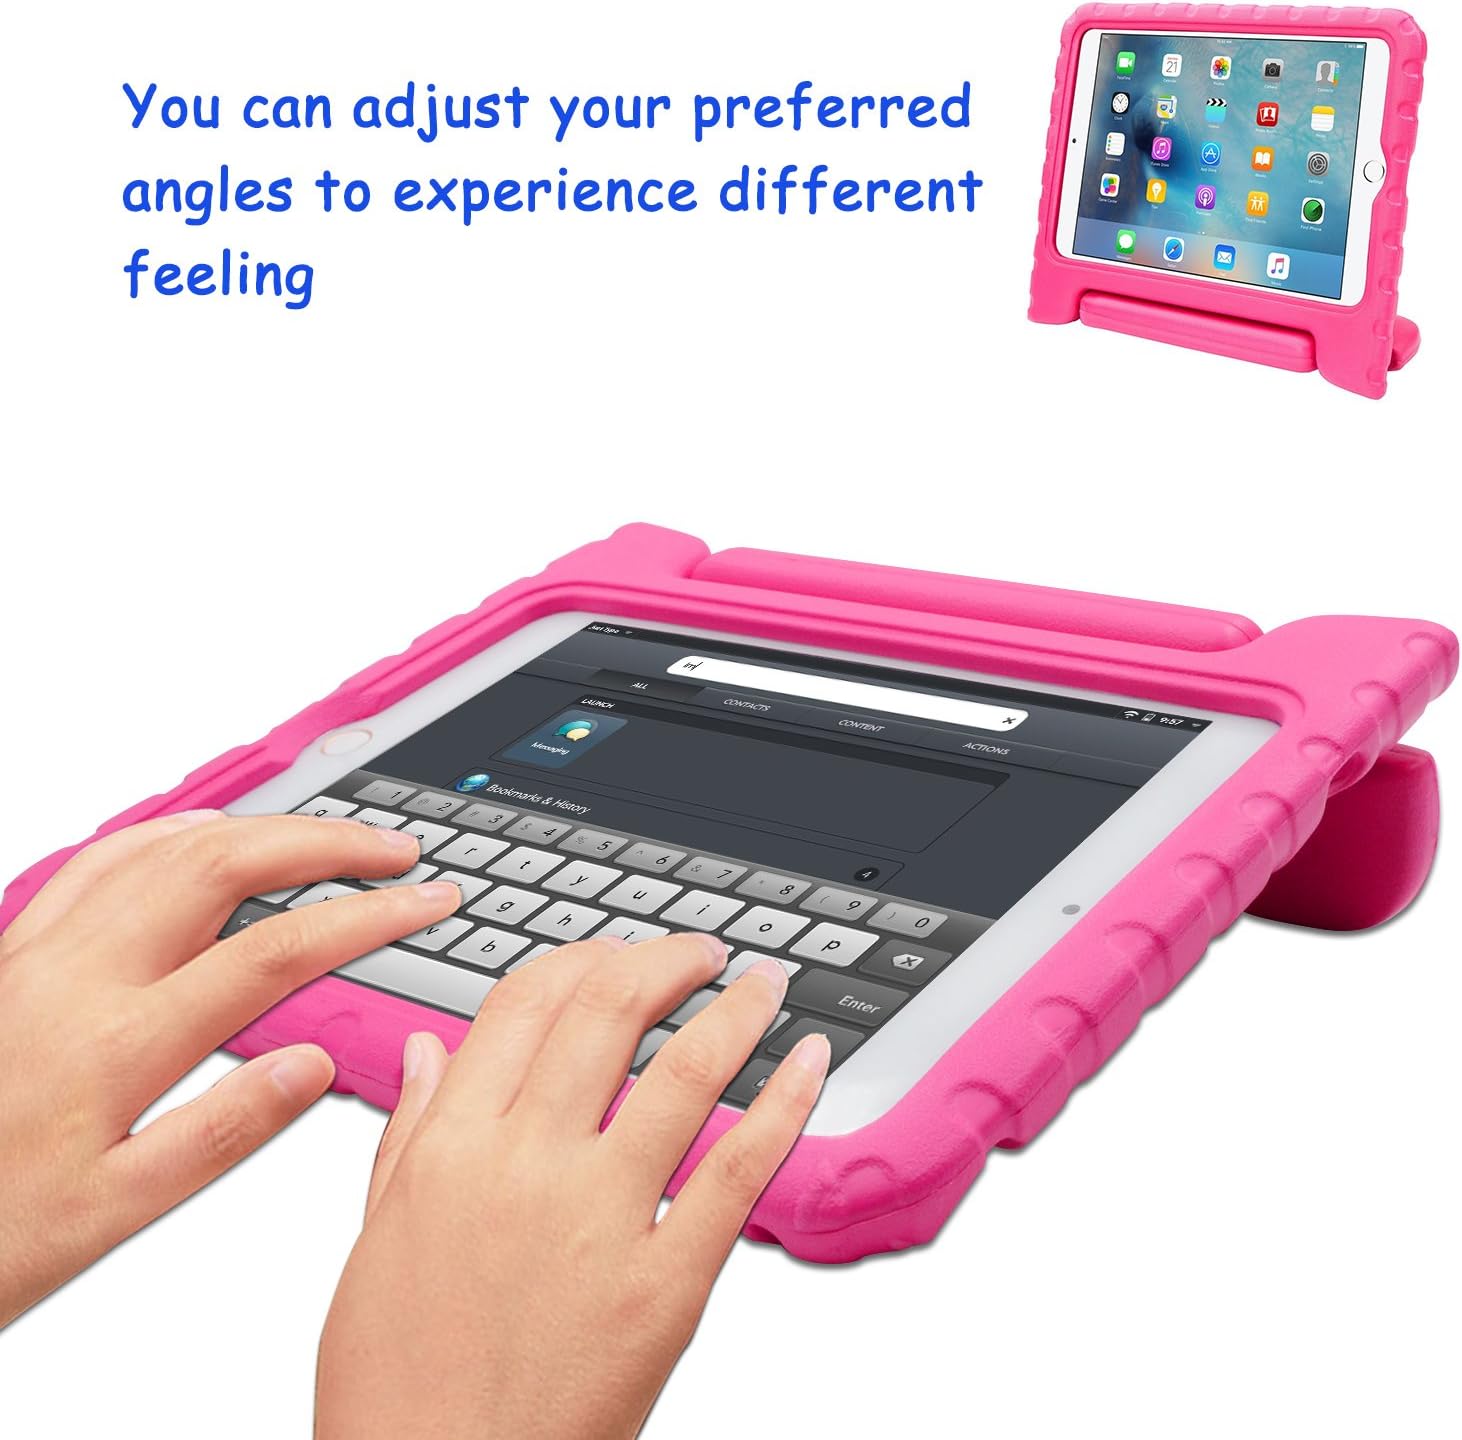 Shockproof Handle case with Stand for iPad Mini 1/2/3/4/5 with 7.9 inch Screen (Pink)